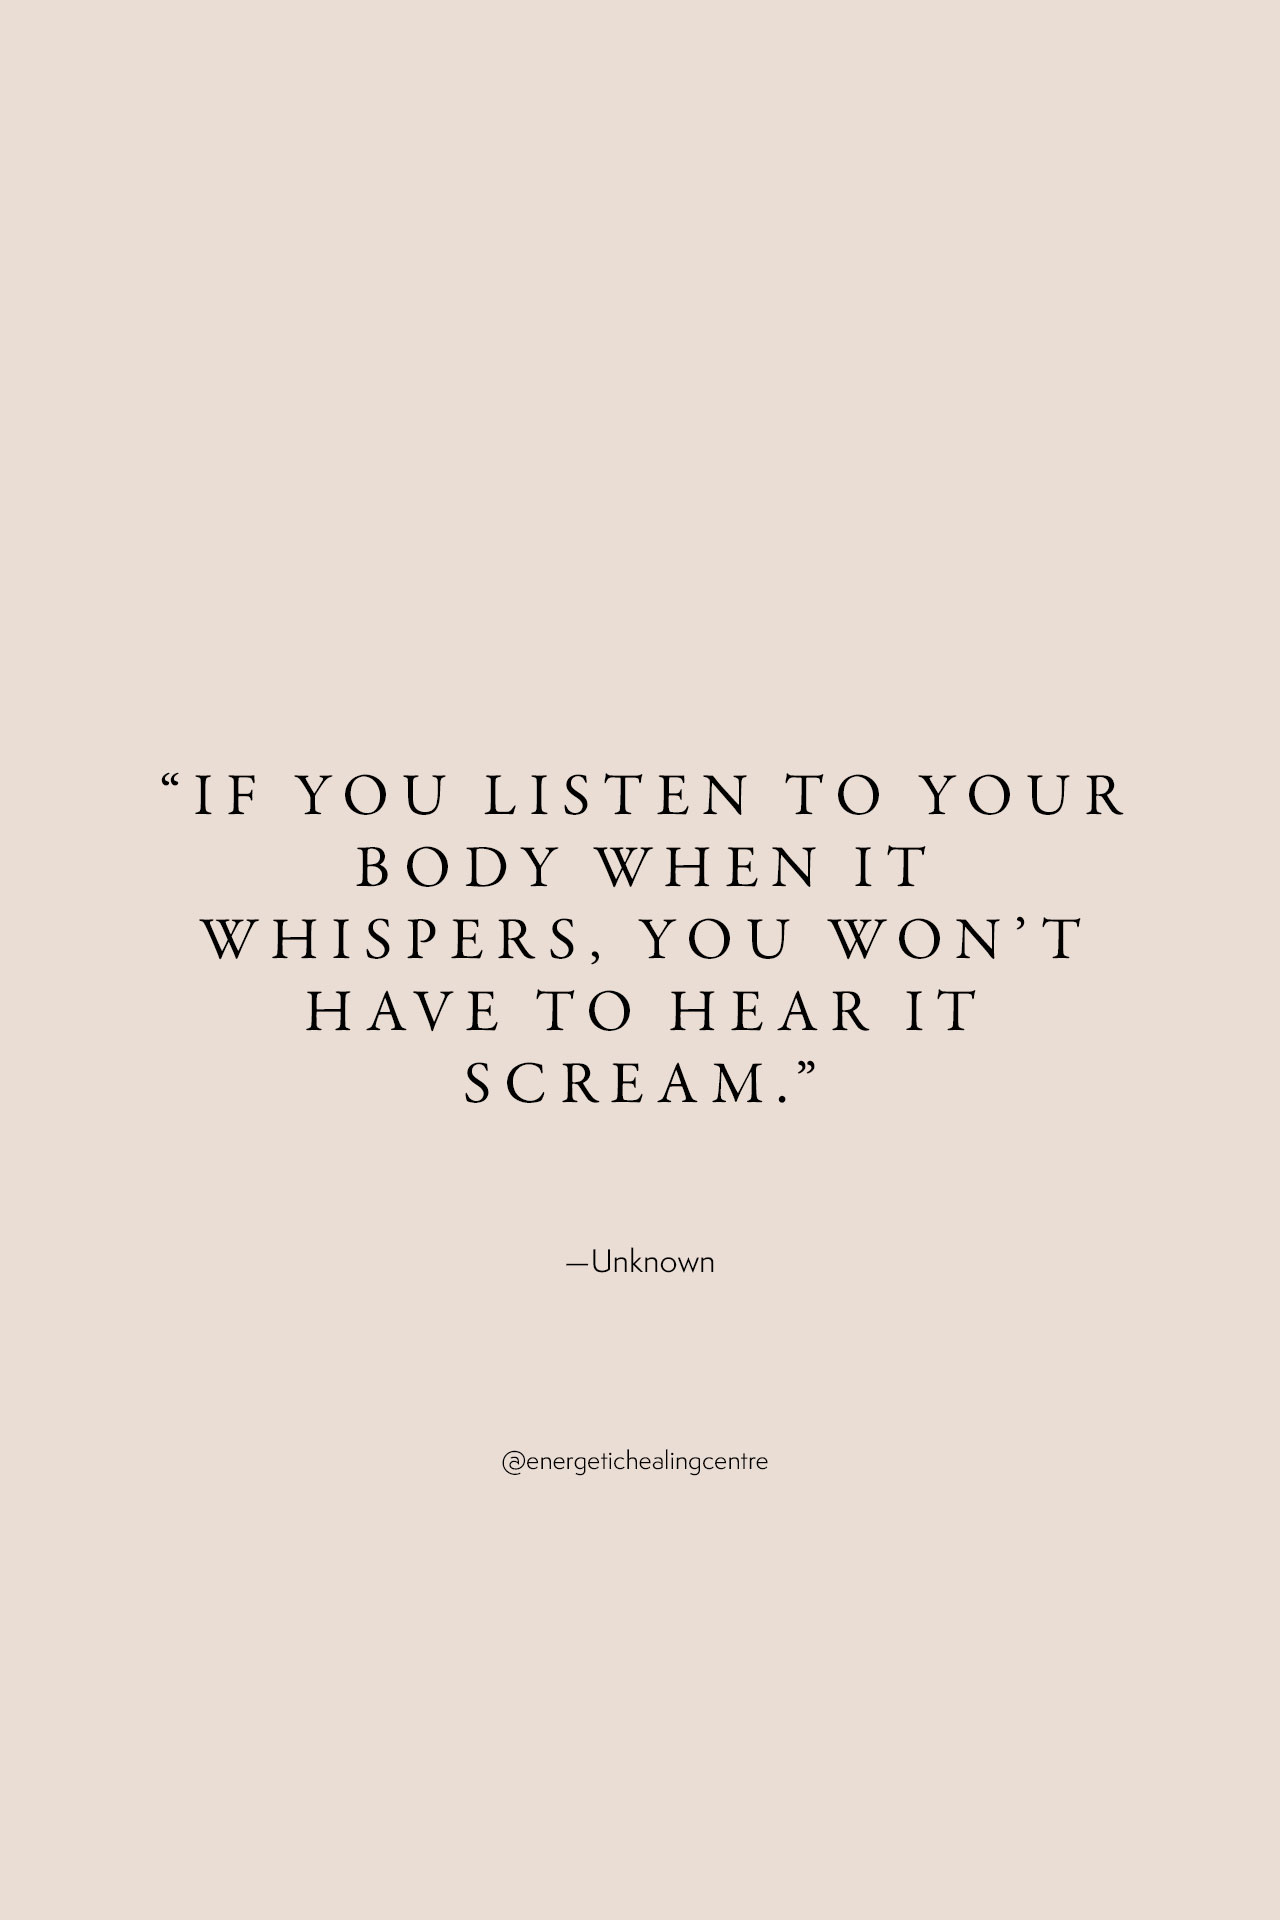 “If you listen to your body when it whispers, you won’t have to hear it scream.” – Unknown